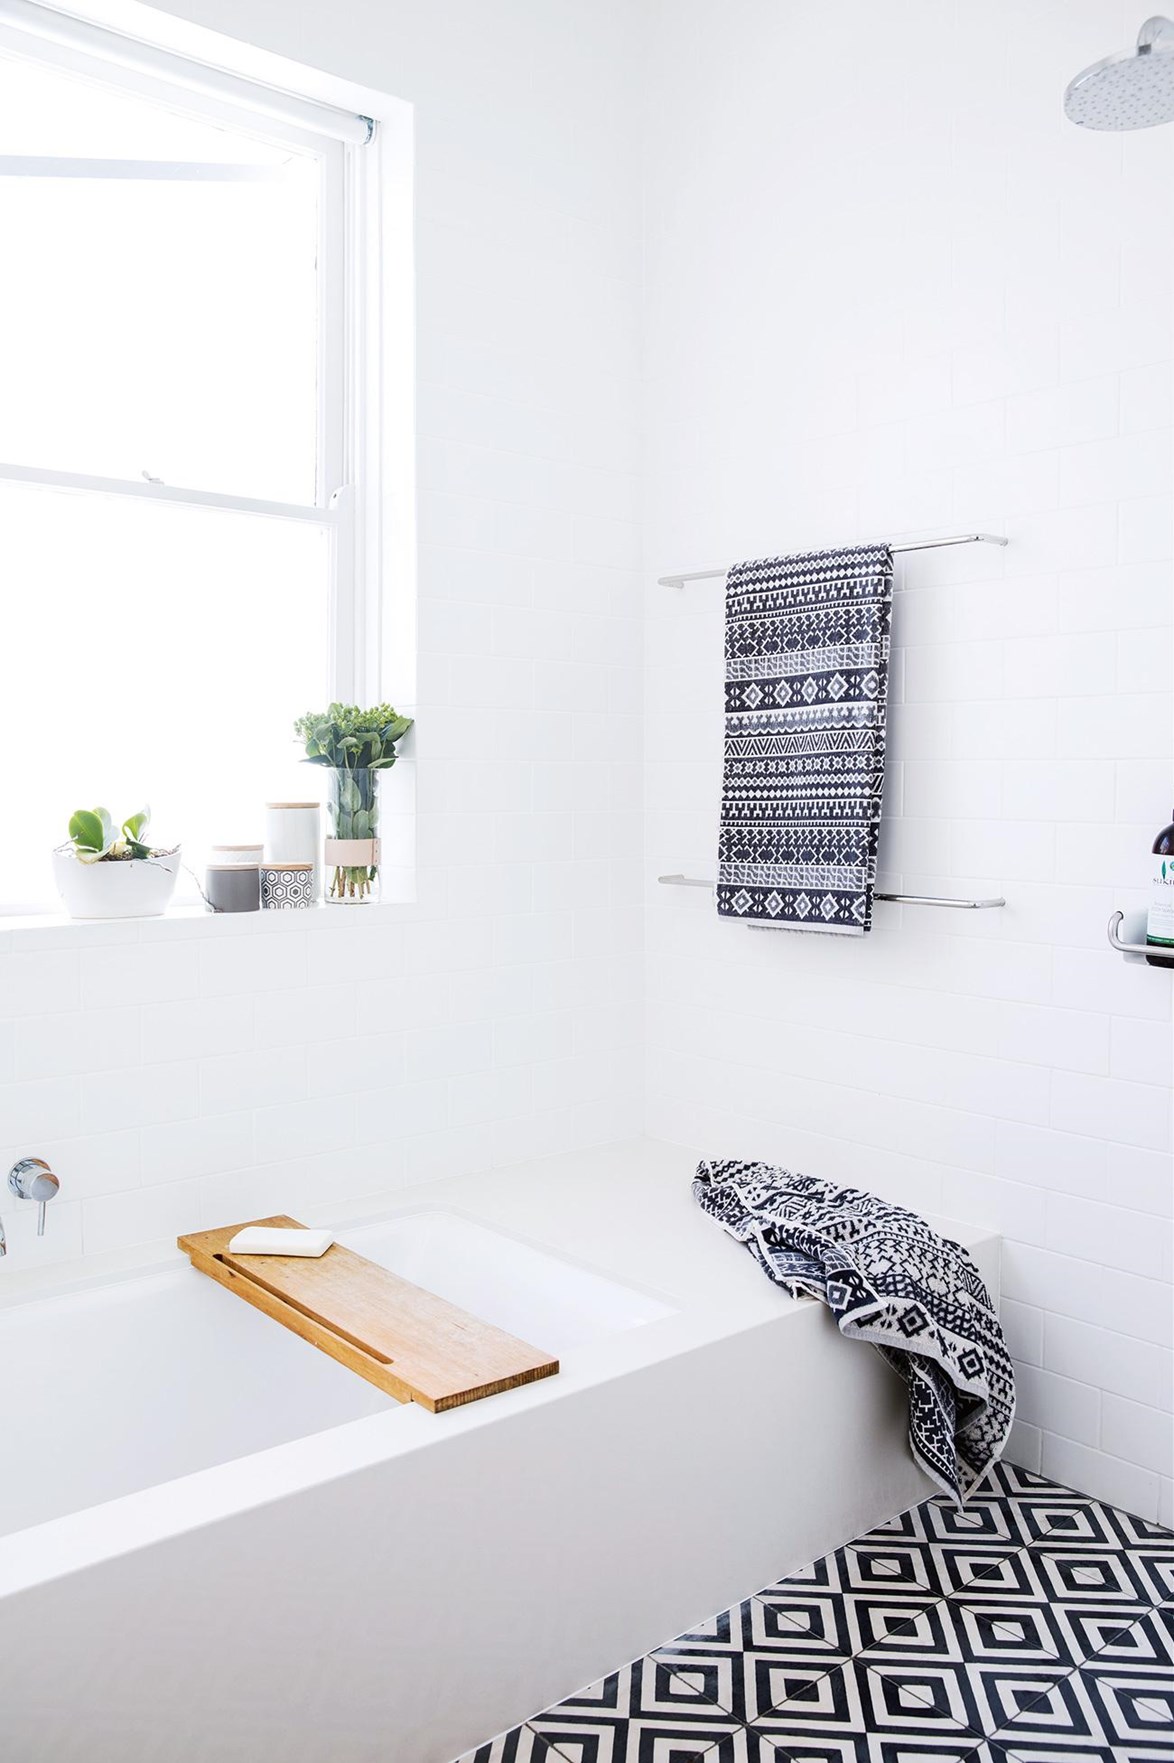 This minimalist white bathroom in a [light filled terrace house](https://www.homestolove.com.au/minimalist-inspiration-from-a-light-filled-terrace-18366|target="_blank") in Sydney's eastern suburb of Paddington is anything but dull with black and white patterned floor tiles. "All our homes have been bright and full of light, but we have experimented with colour – starting with vibrant shades, then moving into neutral tones and finally to my favourite – white," says owner Sarah.